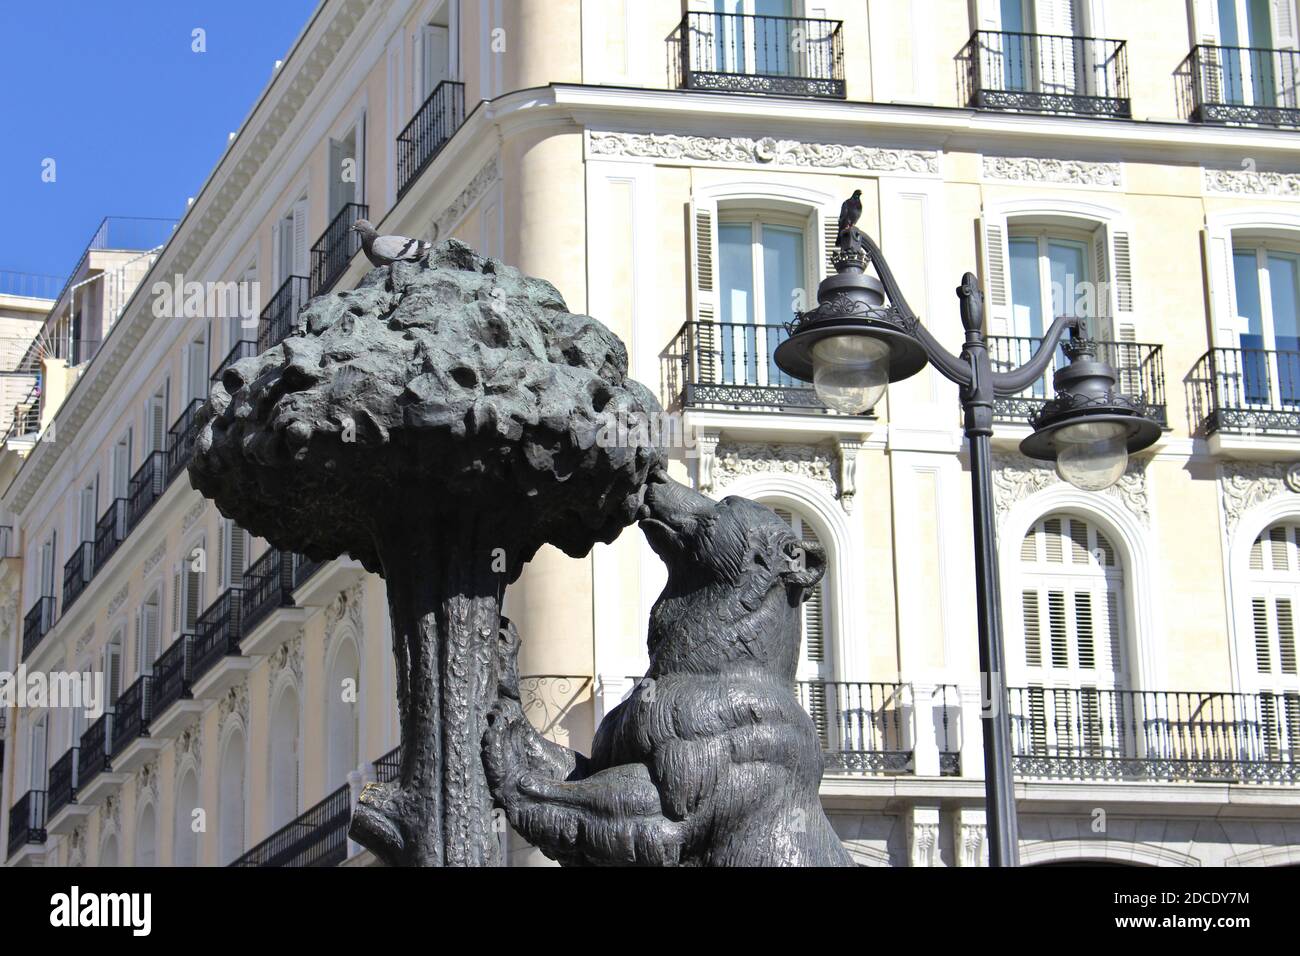 El Oso y el Madroño, Statue of the Bear and the Strawberry Tree in Madrid Stock Photo